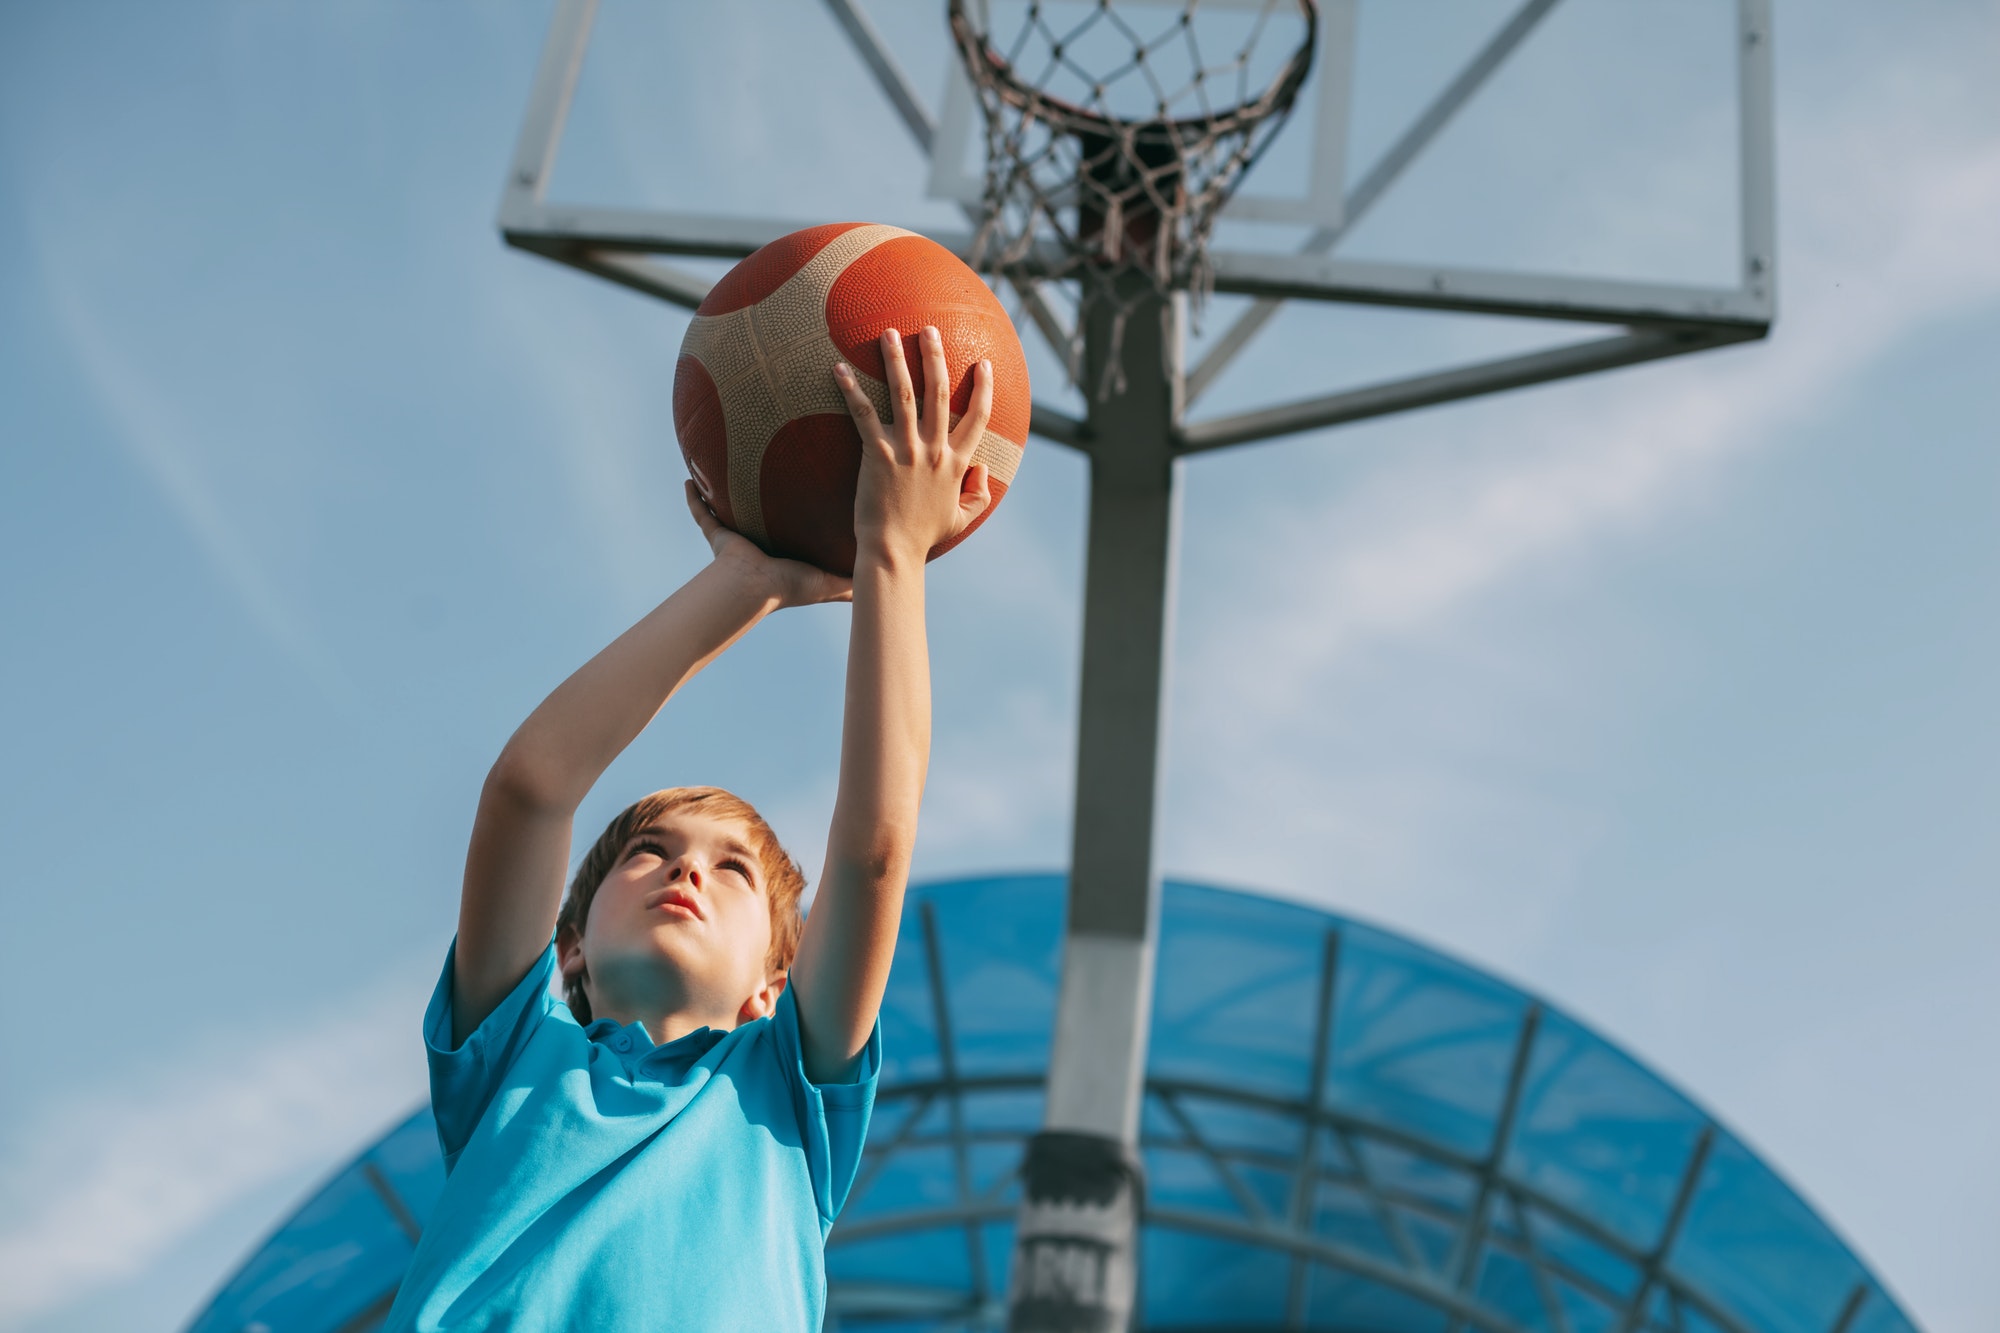 Things to Teach Your Child About Basketball